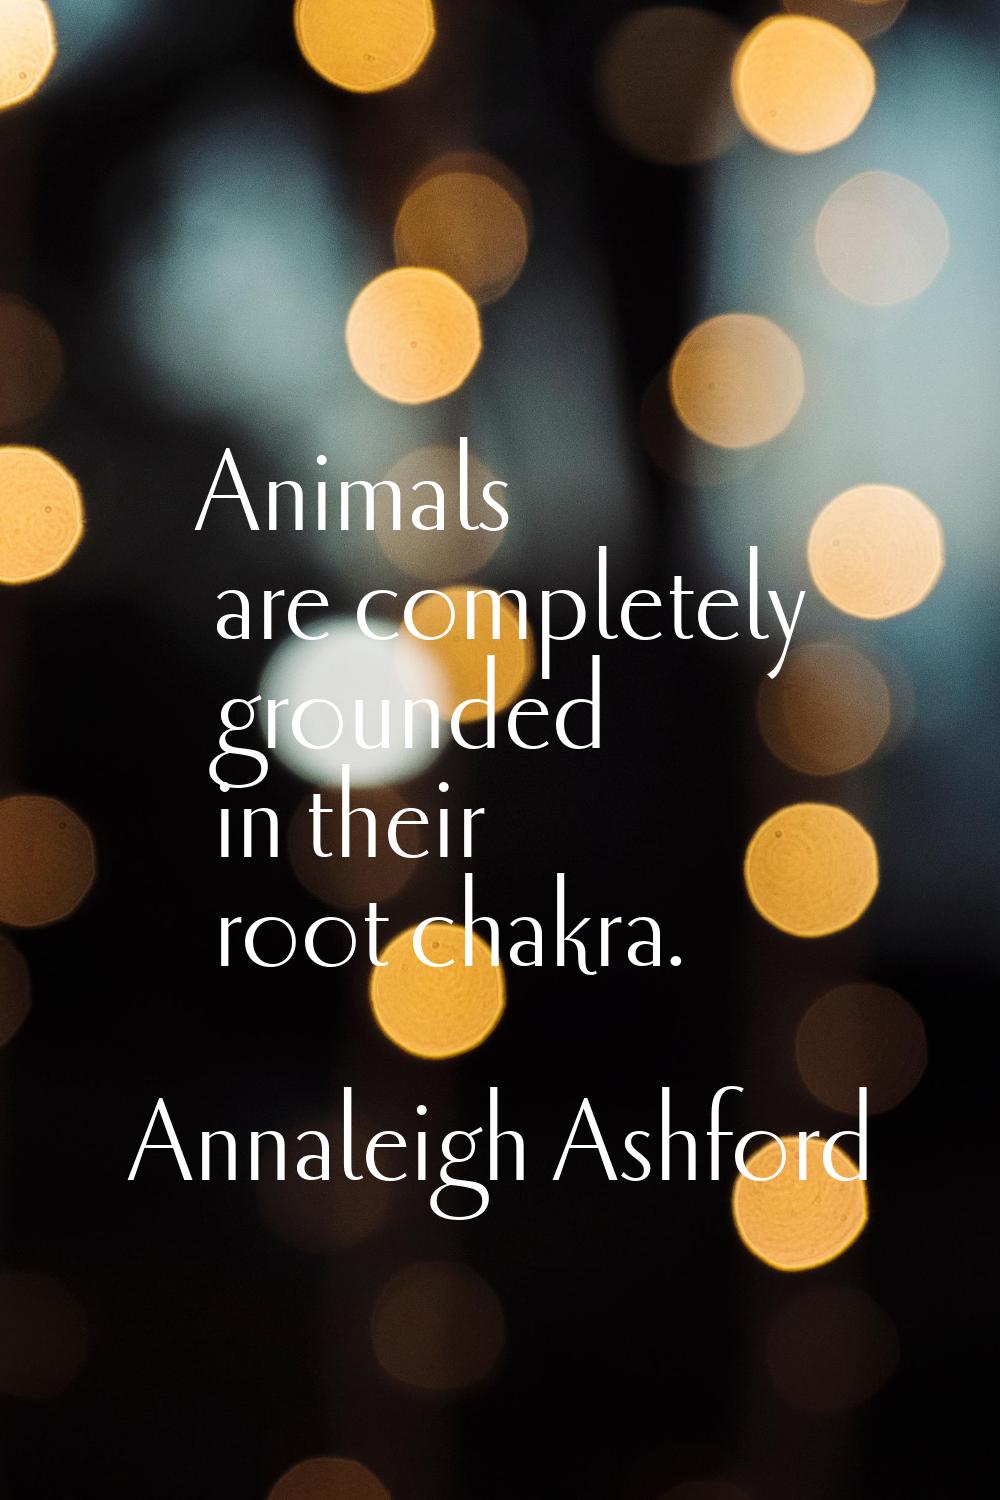 Animals are completely grounded in their root chakra.